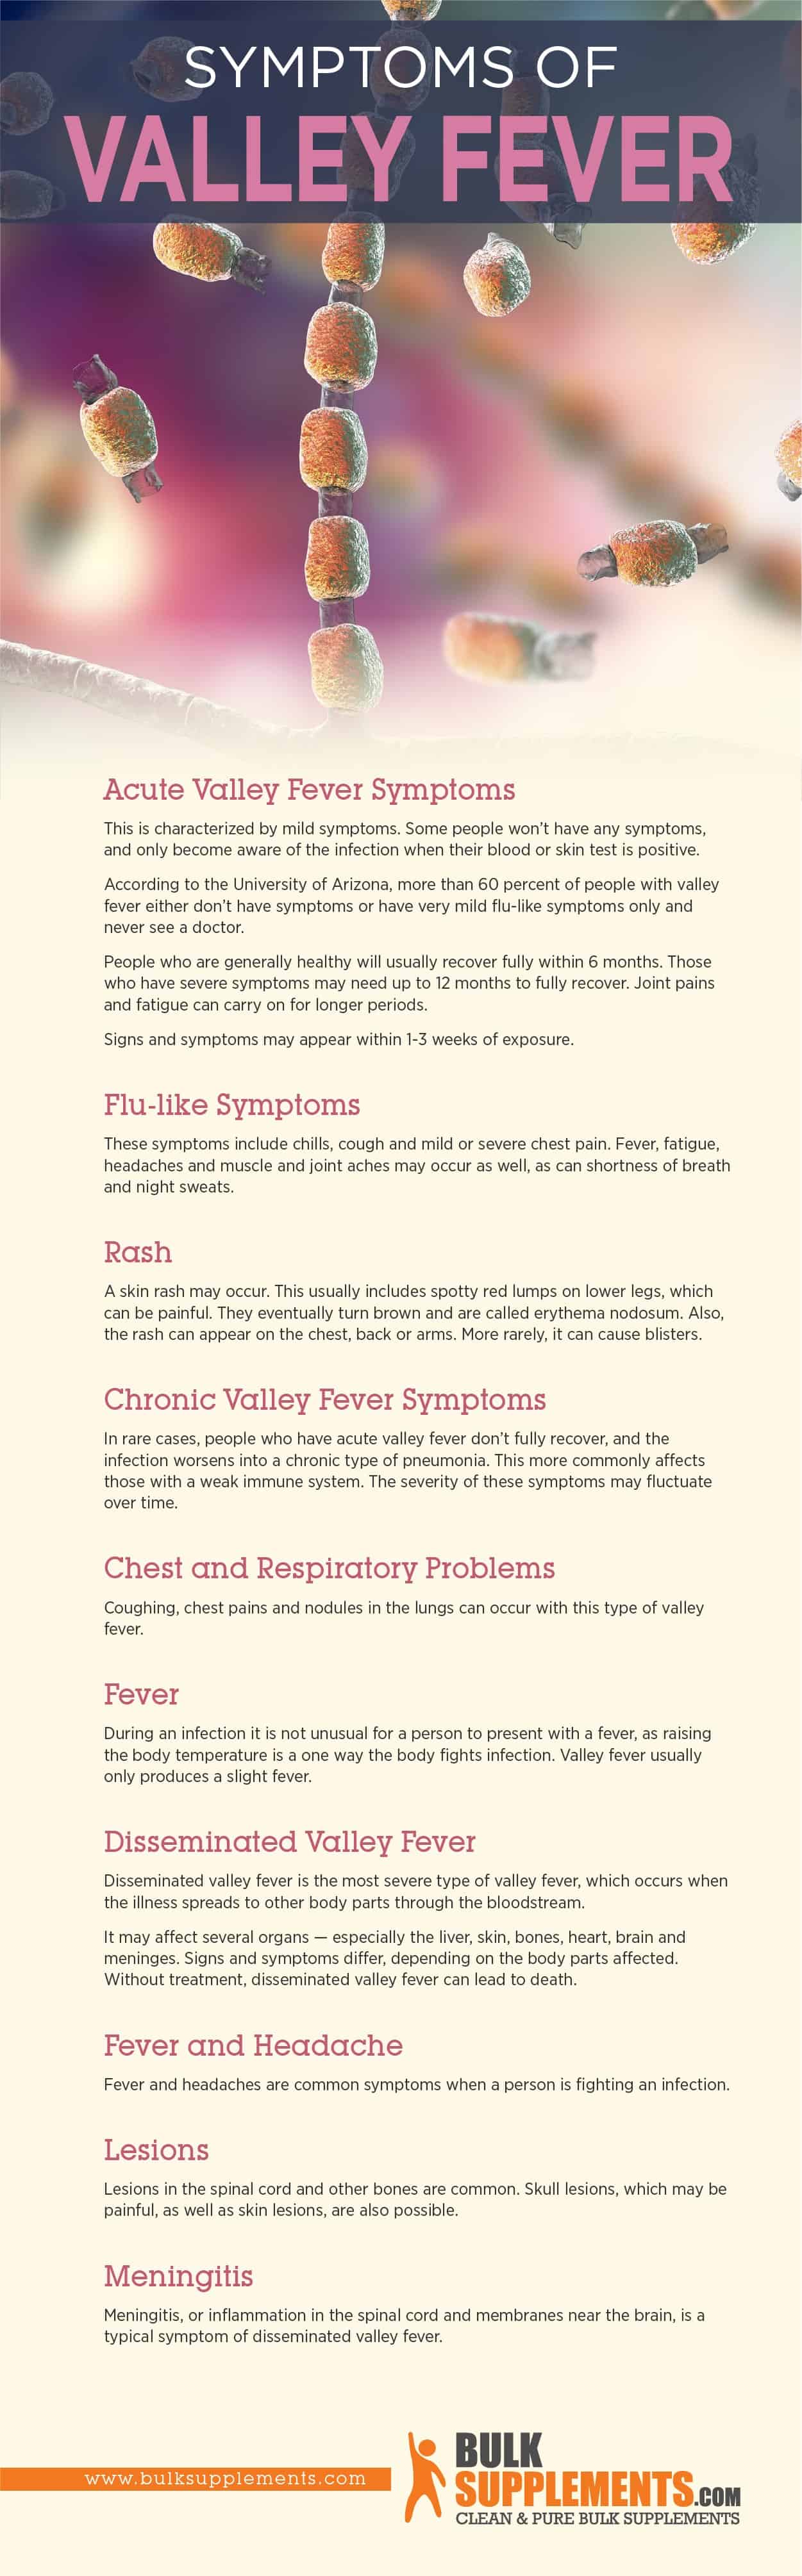 Symptoms of Valley Fever